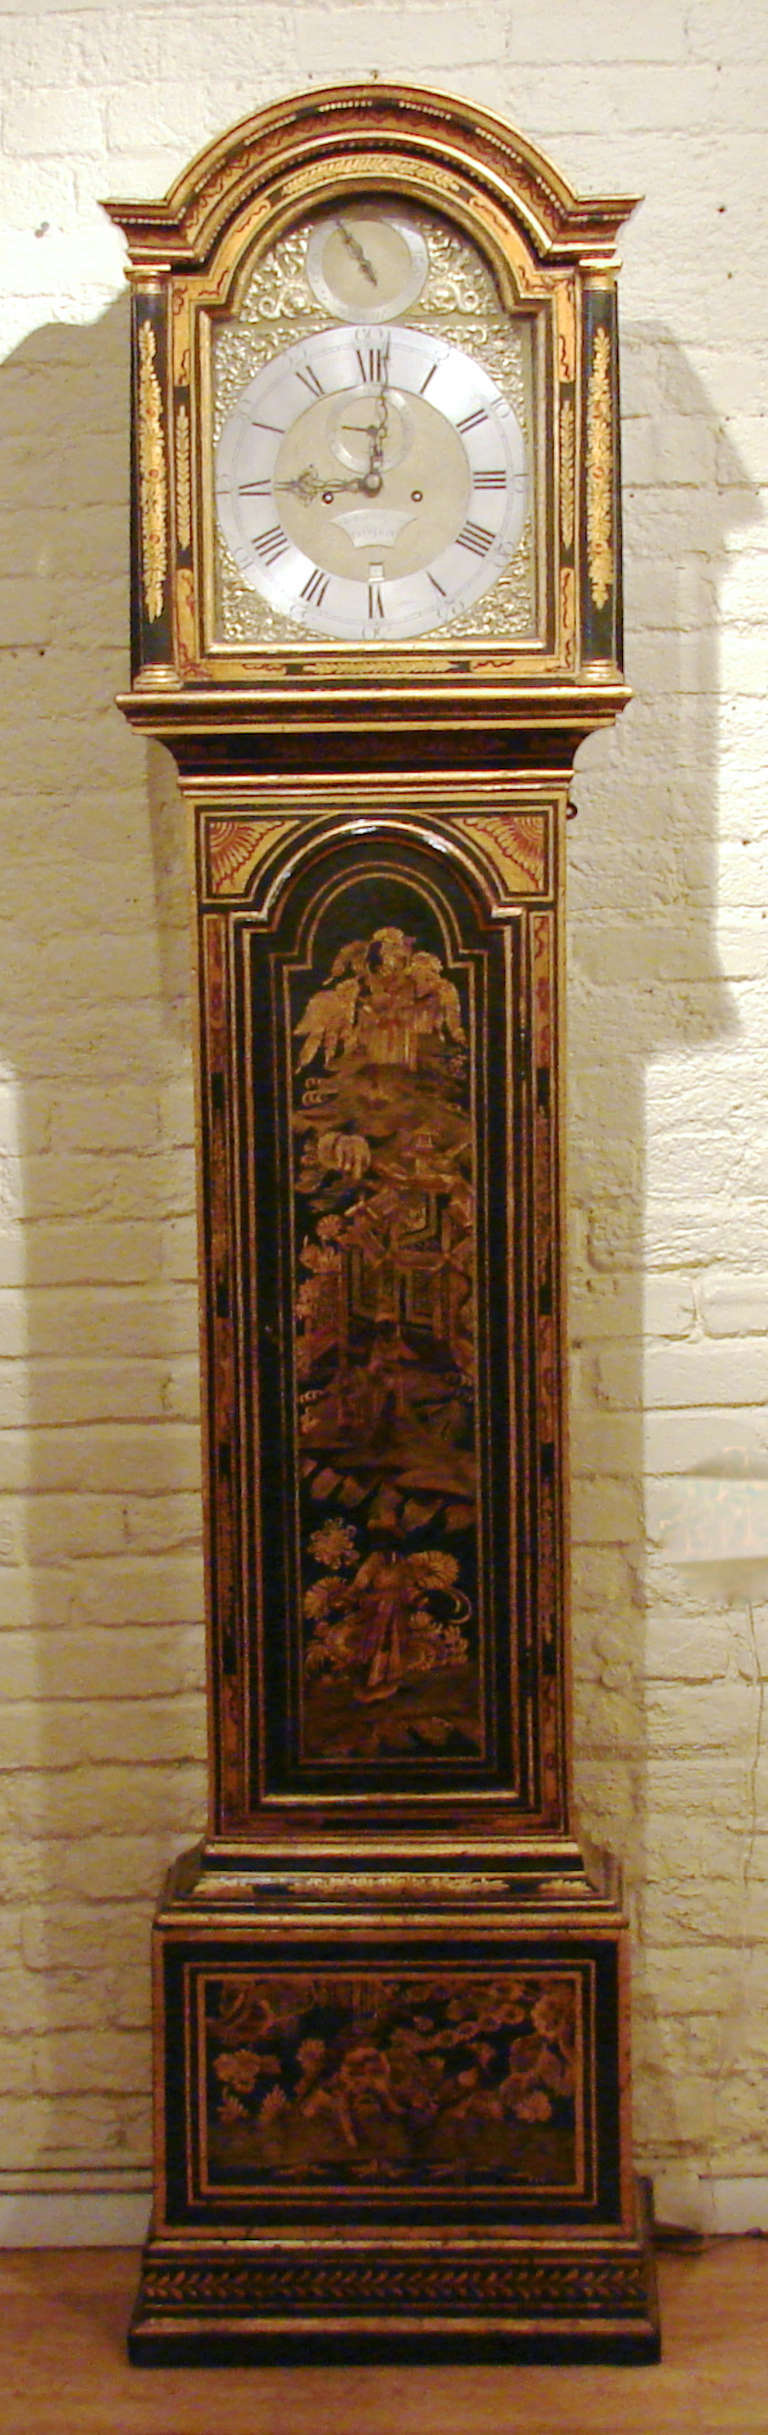 An attractive George III period tall case clock, the 8 day time and strike movement made and signed by James Scholefield, London, circa 1770. The later decorated dark turquoise case depicting Chinese figures in a garden setting with buildings and